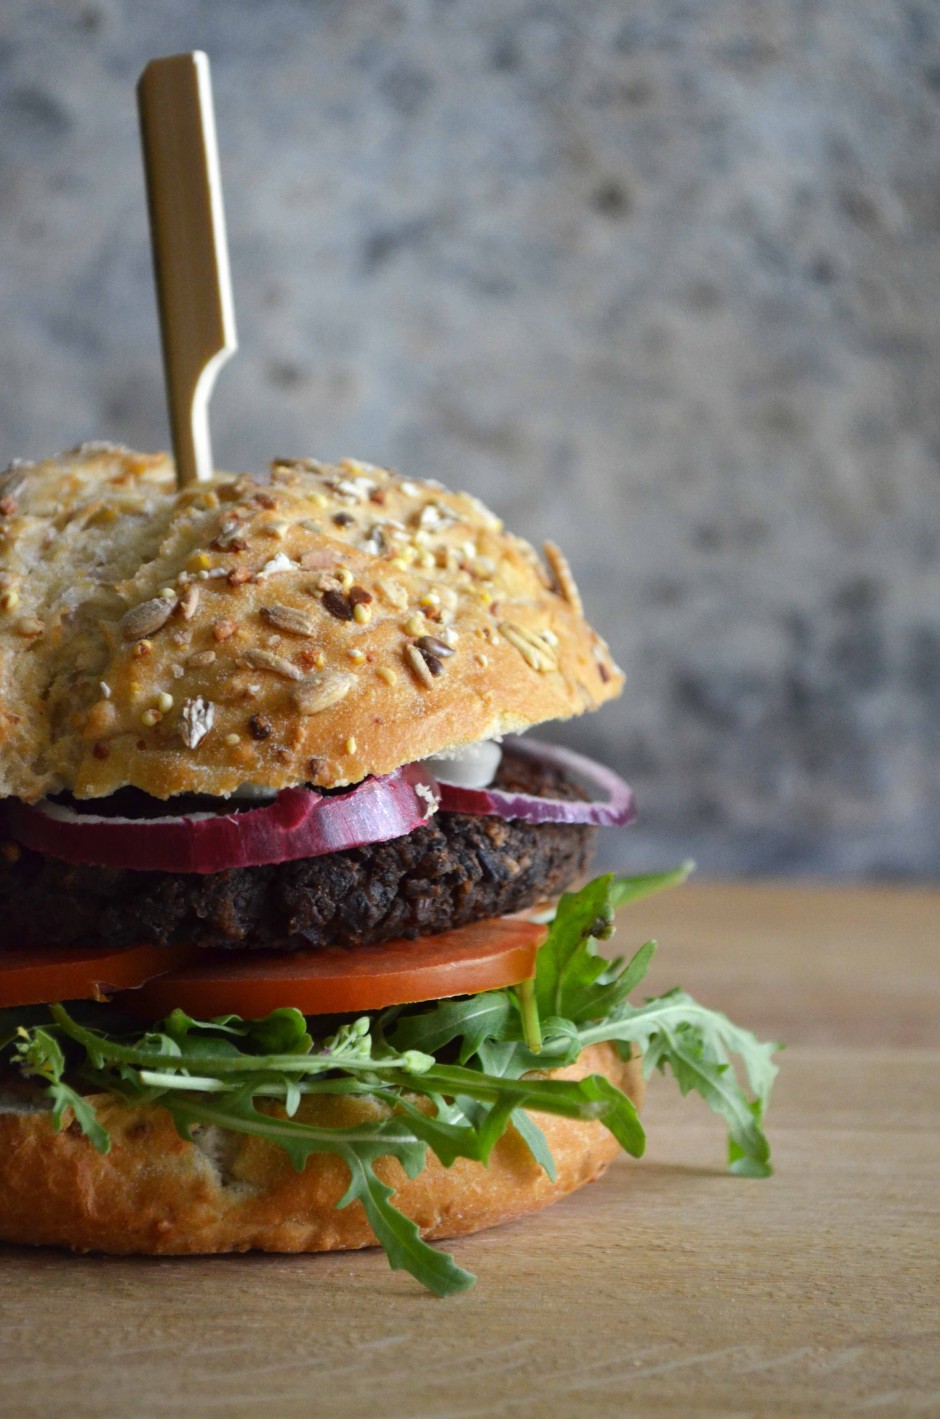 Spicy black bean burger on a bun with red onion, tomato and arugula. Recipe and photo by That Healthy Kitchen